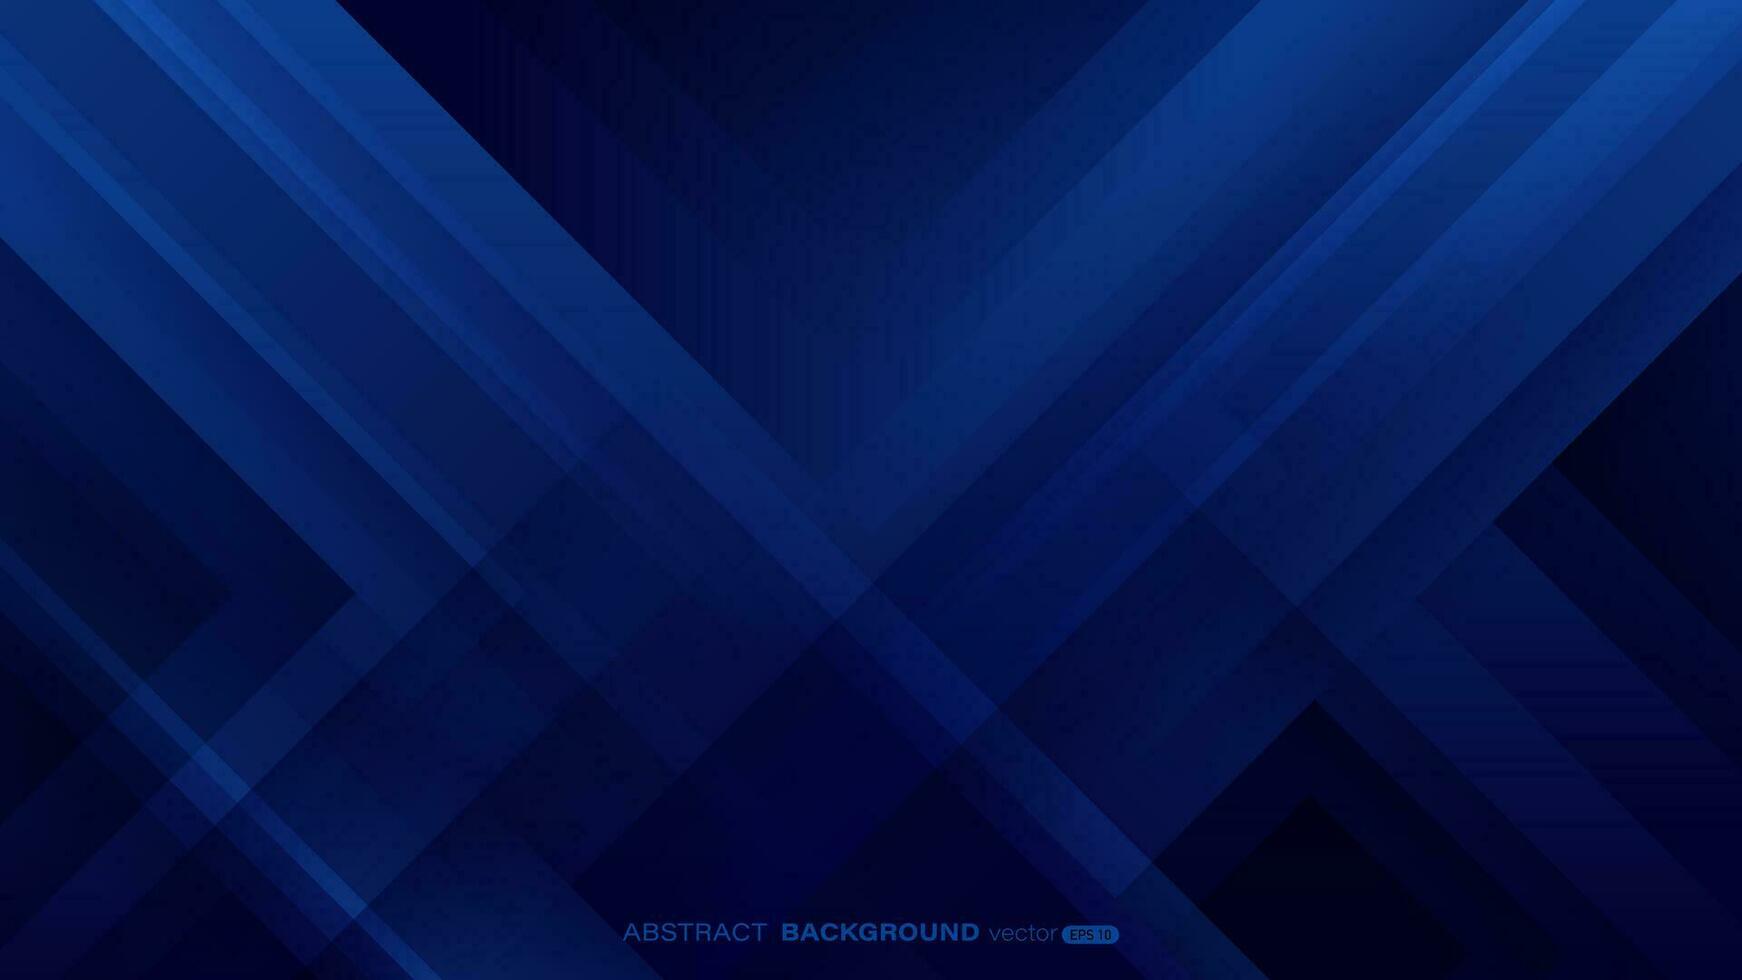 Abstract geometric blue and light with layer element on dark blue background. Vector design template science, futuristic, technology concept